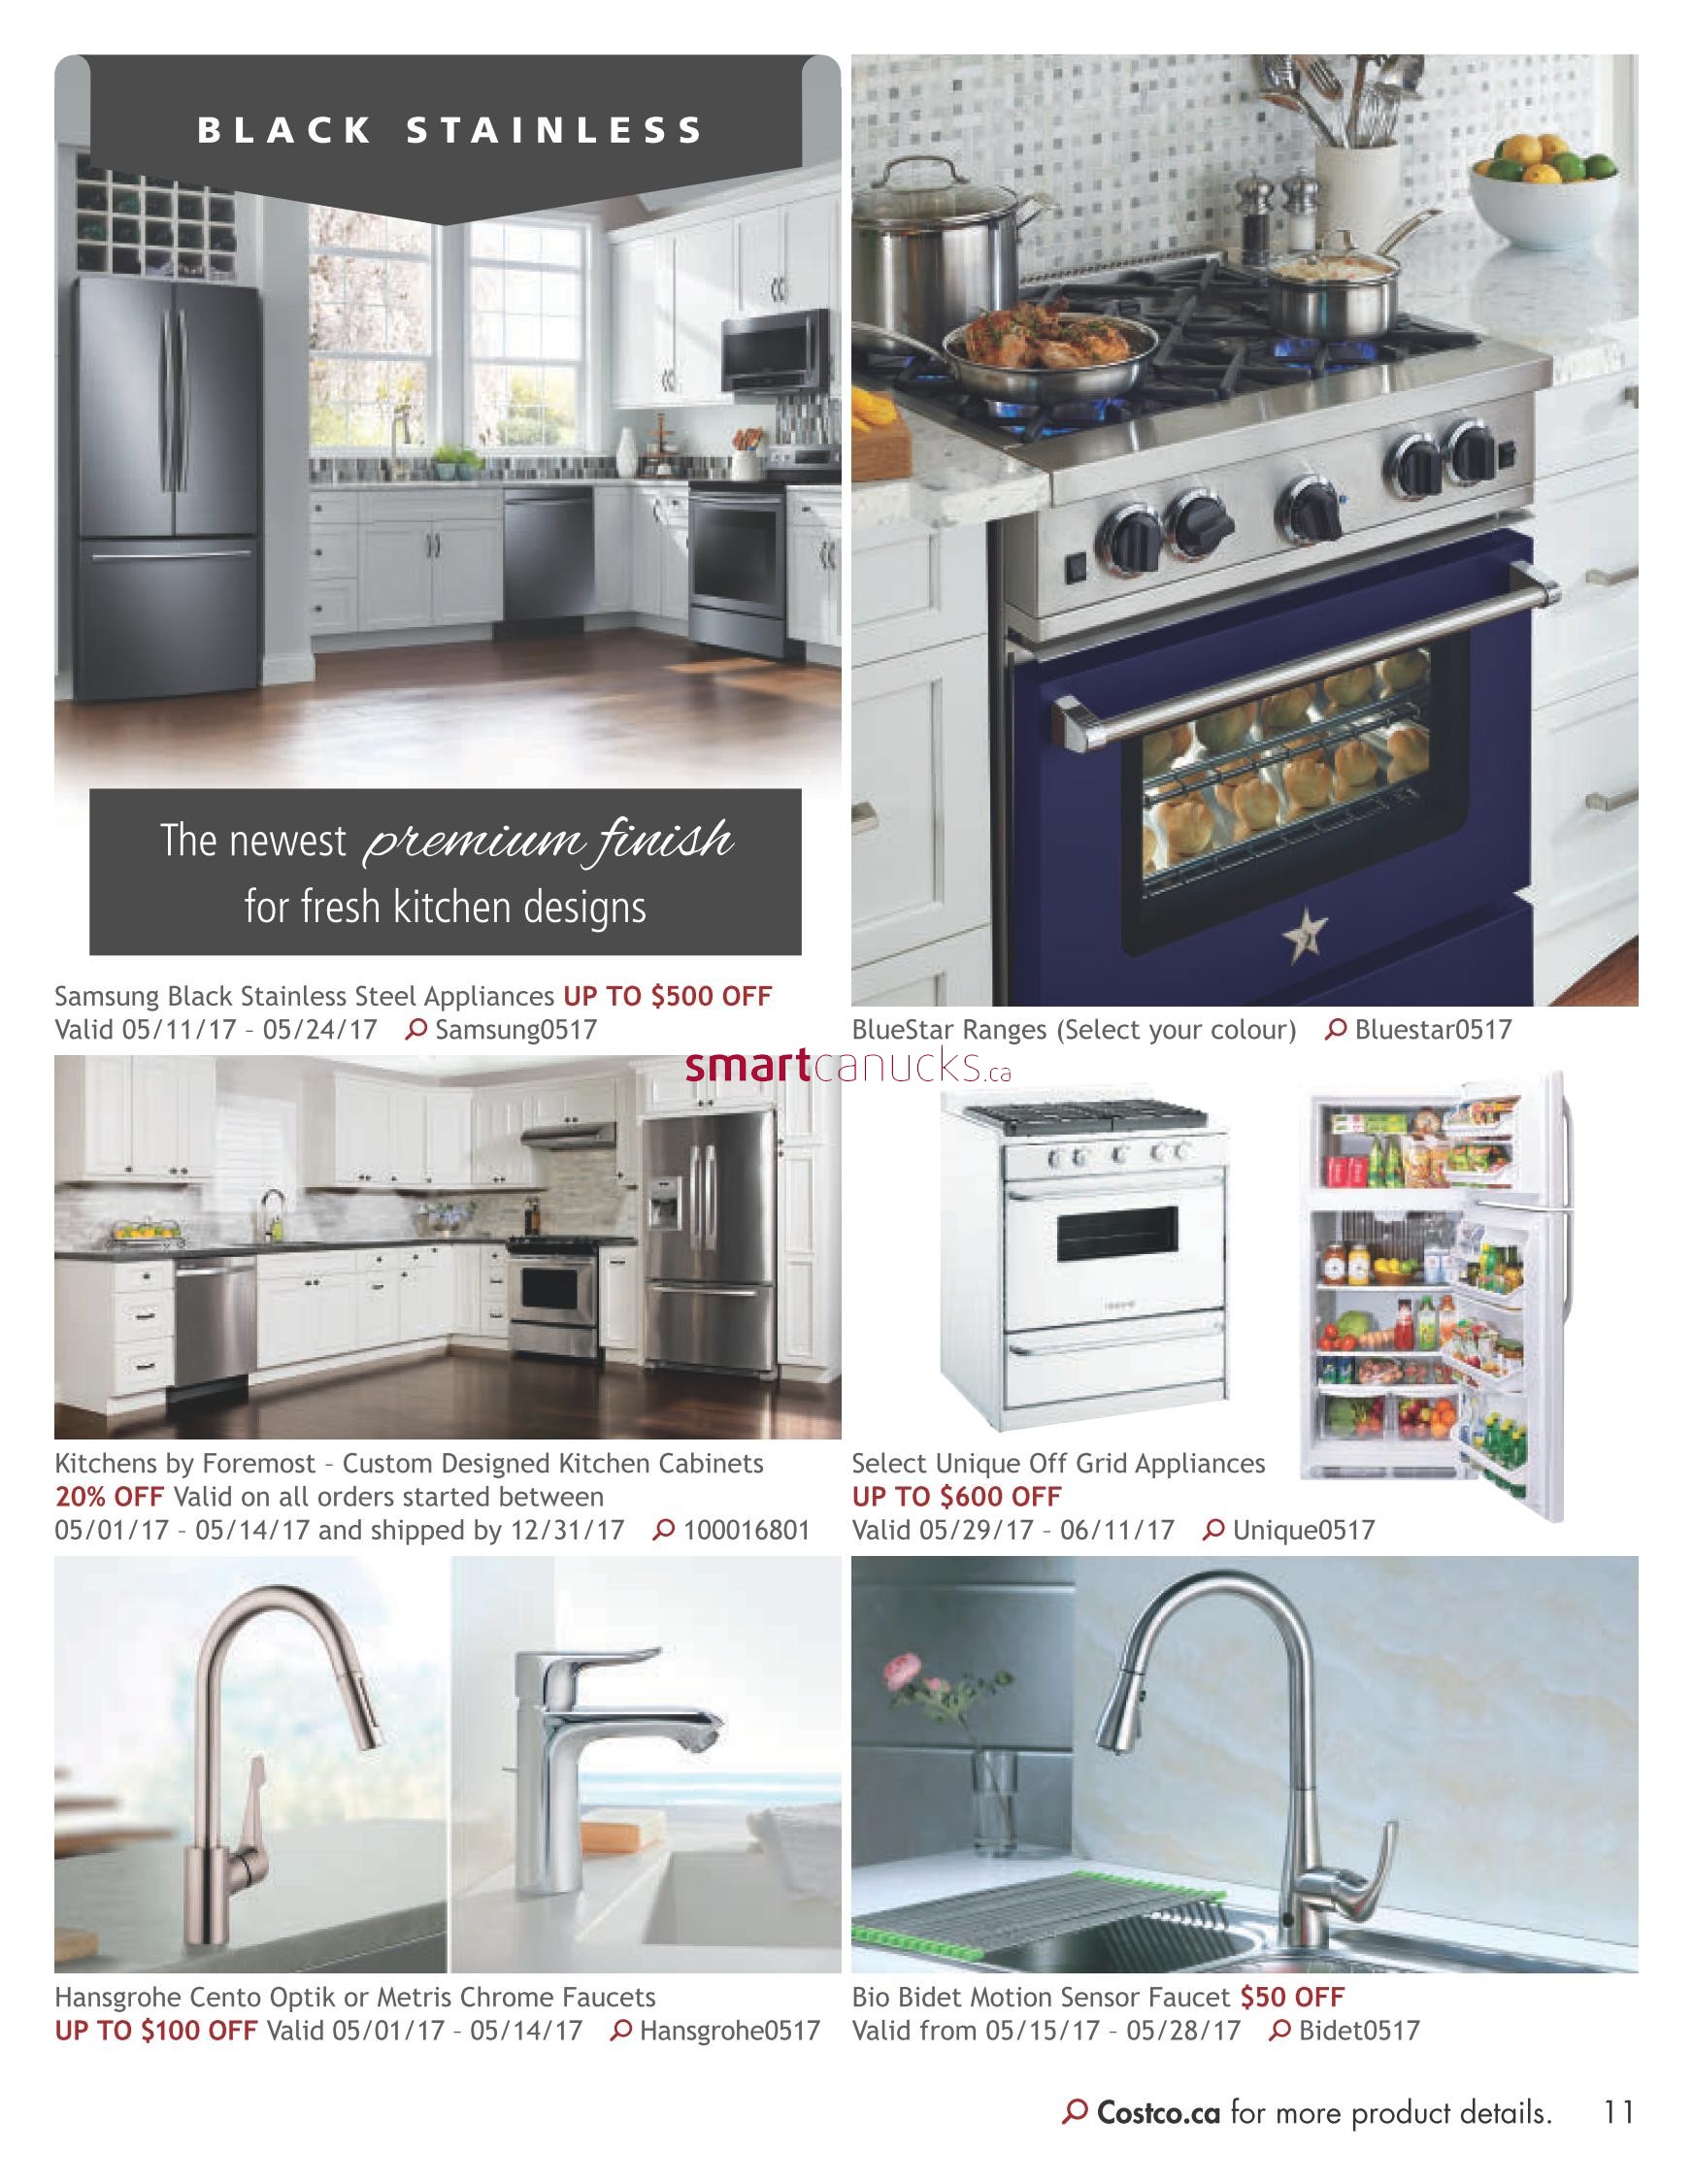 Costco Online Catalogue May 1 to June 30